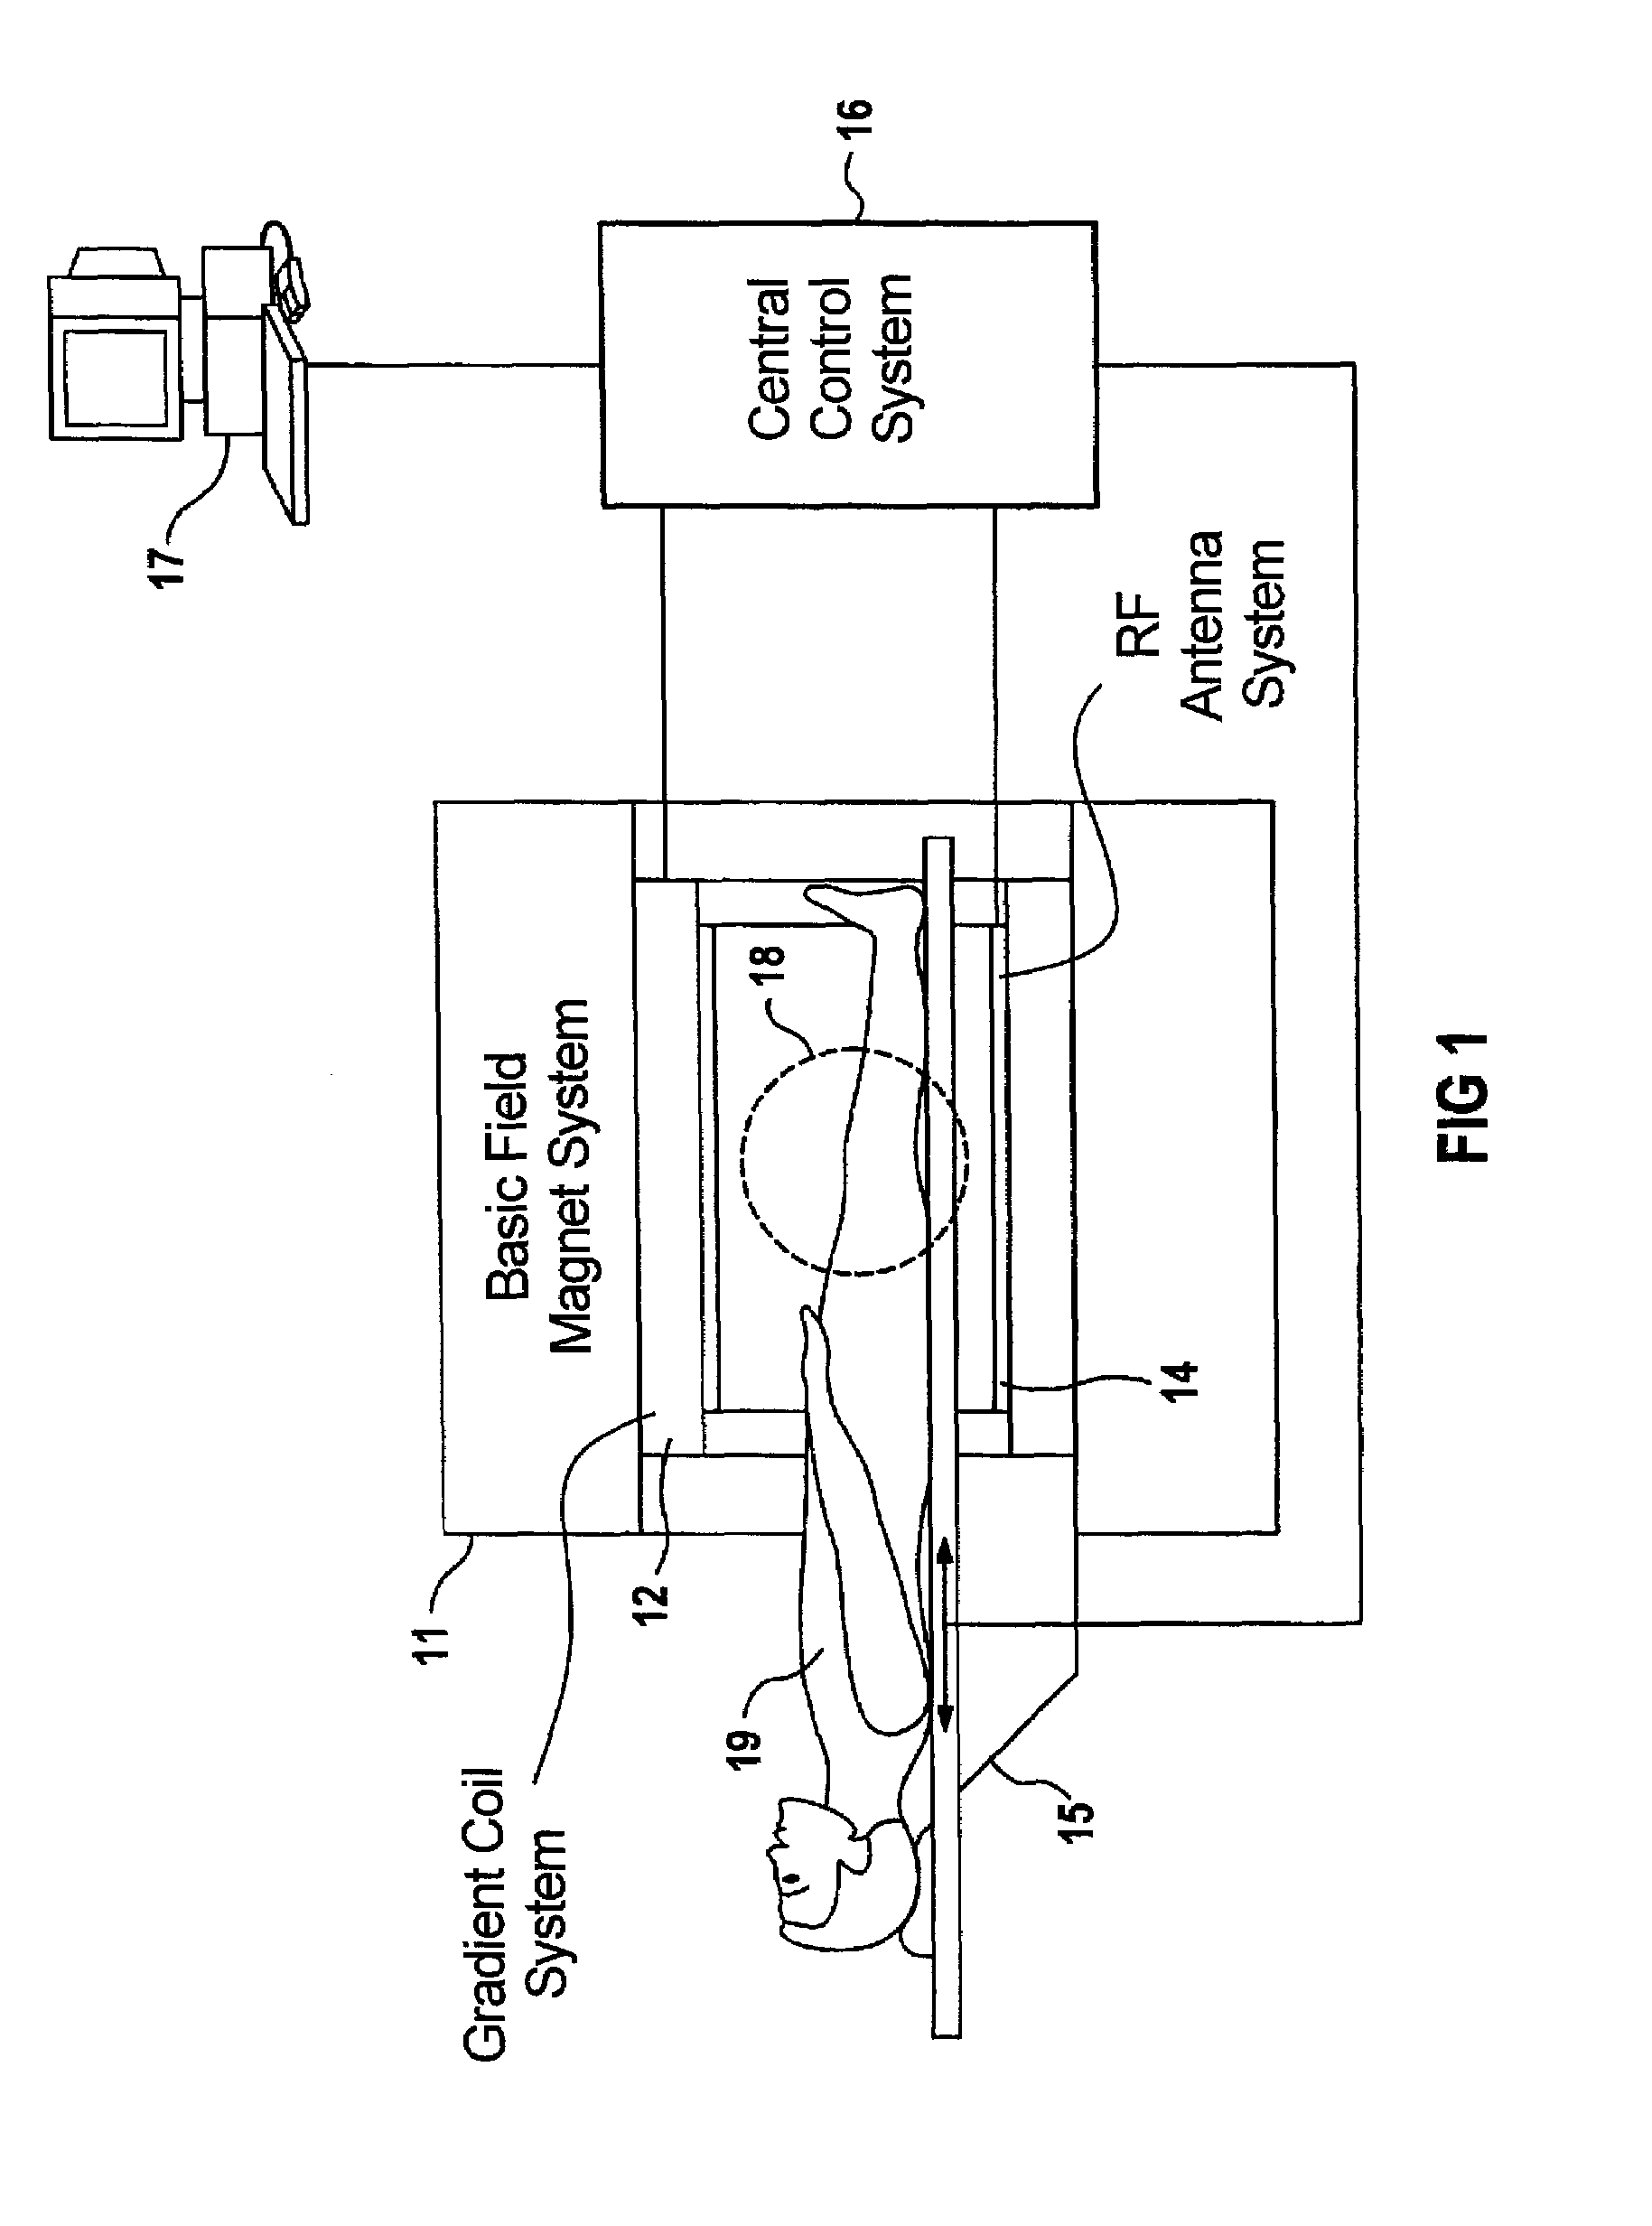 Double echo magnetic resonance imaging sequence and apparatus for the implementation thereof